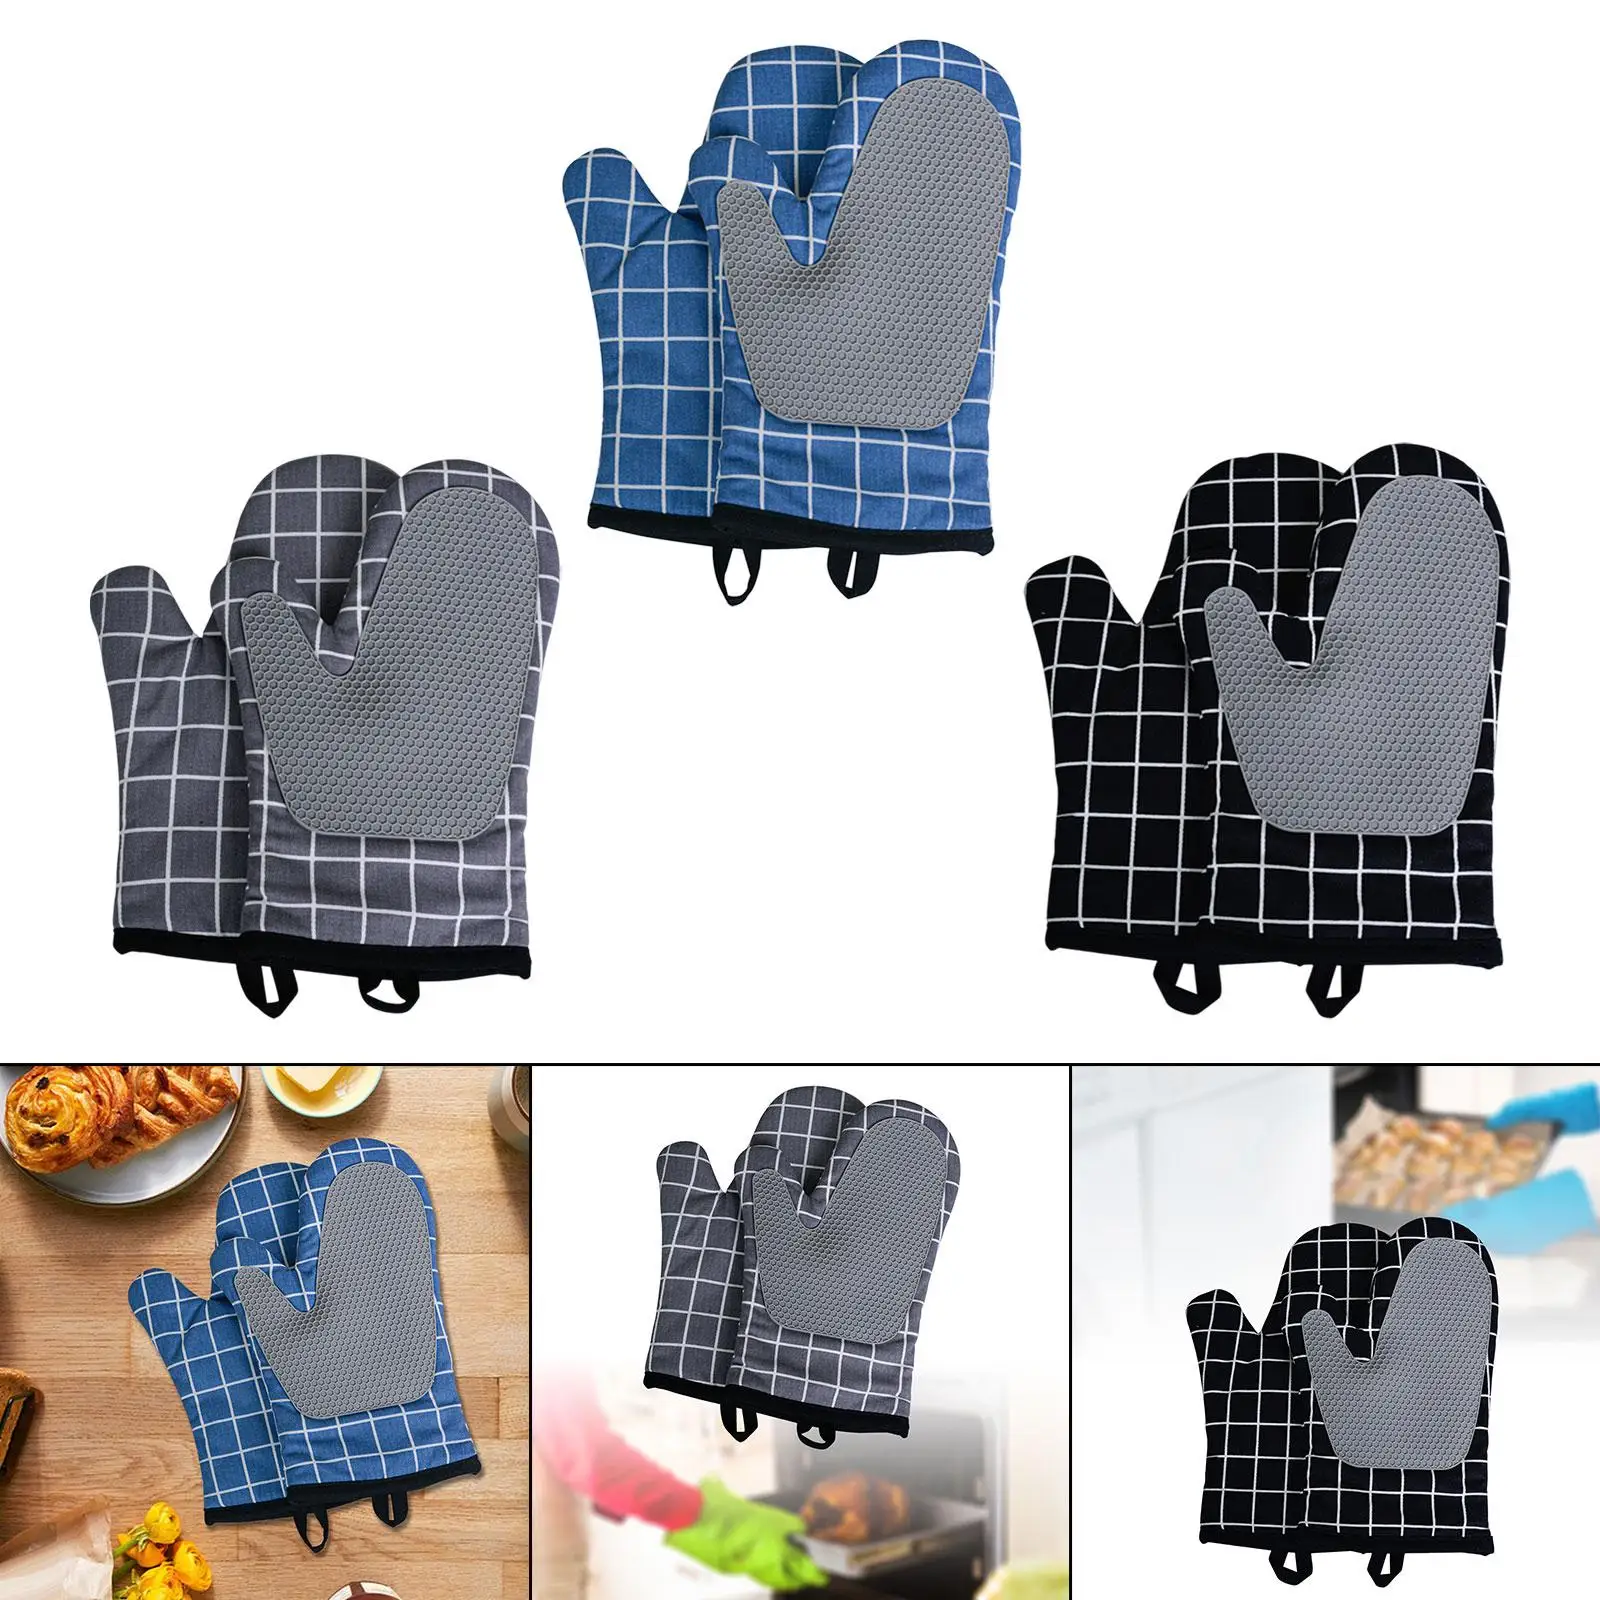 Heat Resistant Oven Gloves Kitchen Gadgets Anti Slip Splicing Silicone Oven Mitts for Cooking Barbecue Baking Camping Microwave